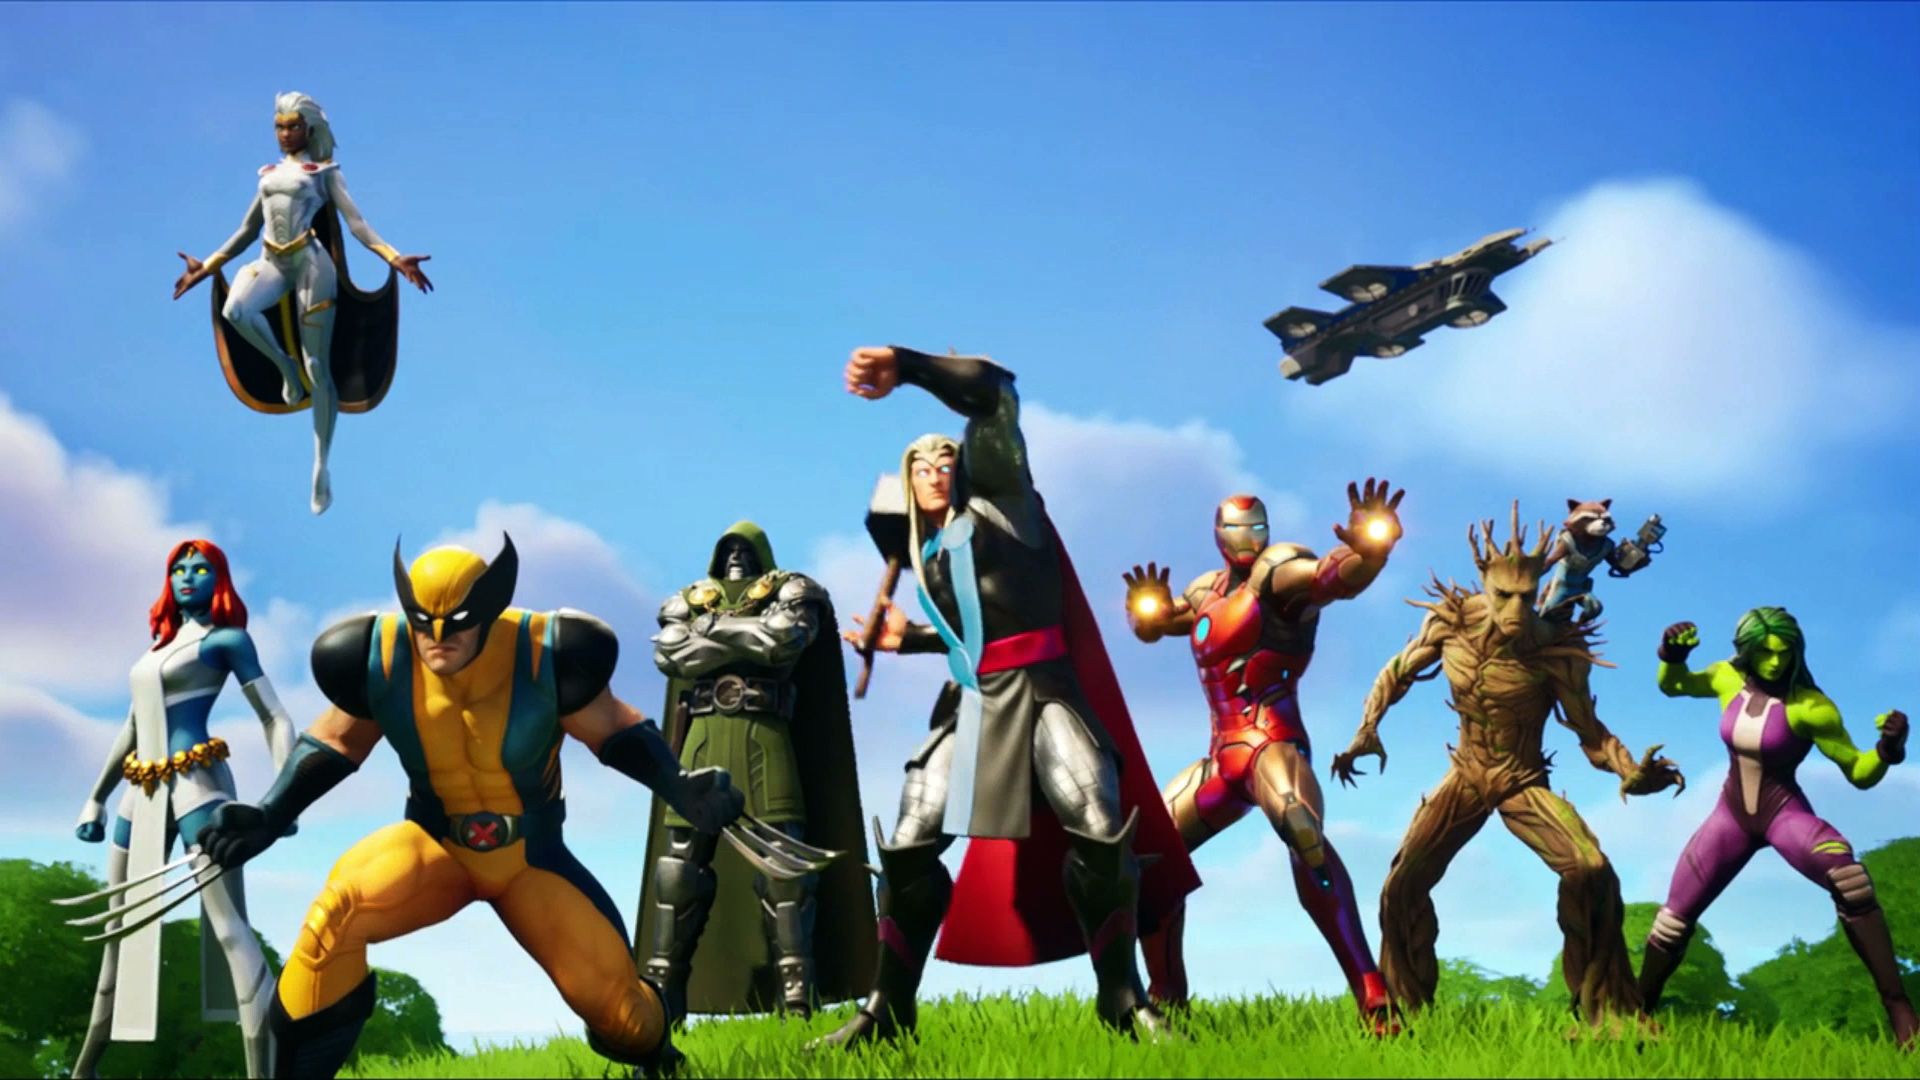 Fortnite Awakening Challenges: How To Unlock Built In Emotes For All Of The Marvel Heroes